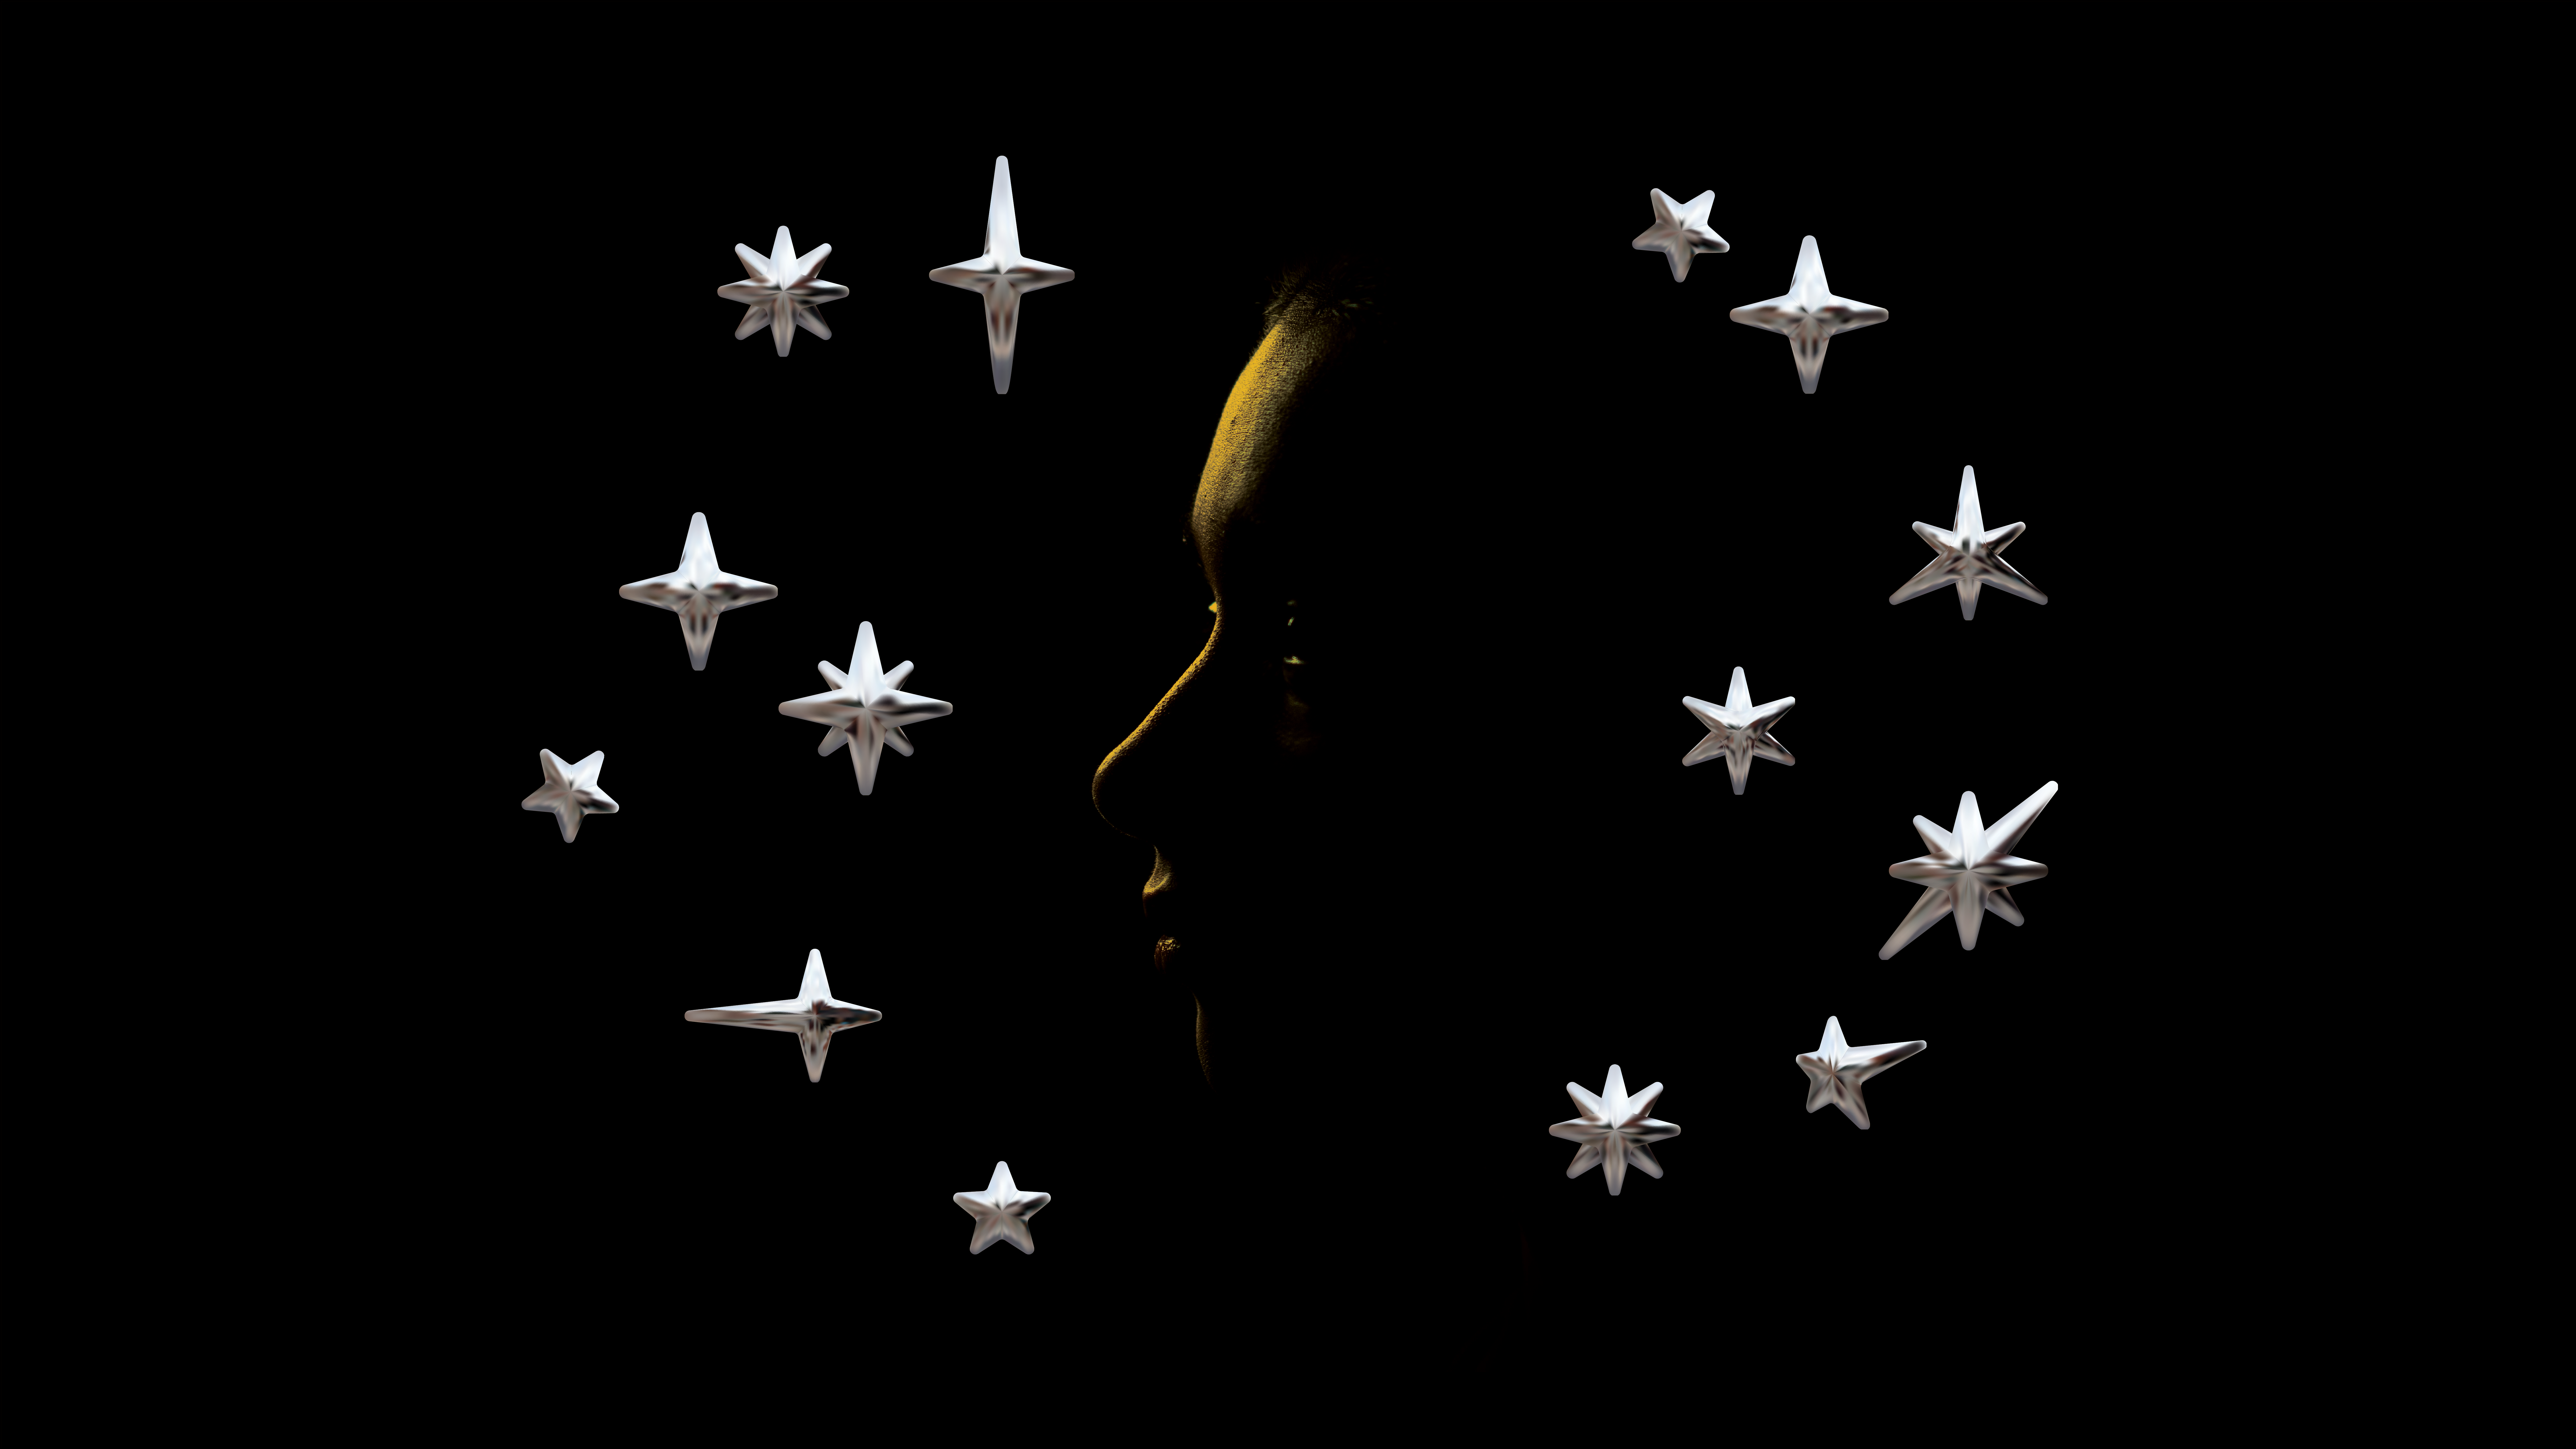 The silhouette of a young woman on a black background has golden backlighting. 3D-rendered metallic star shapes surround her face.